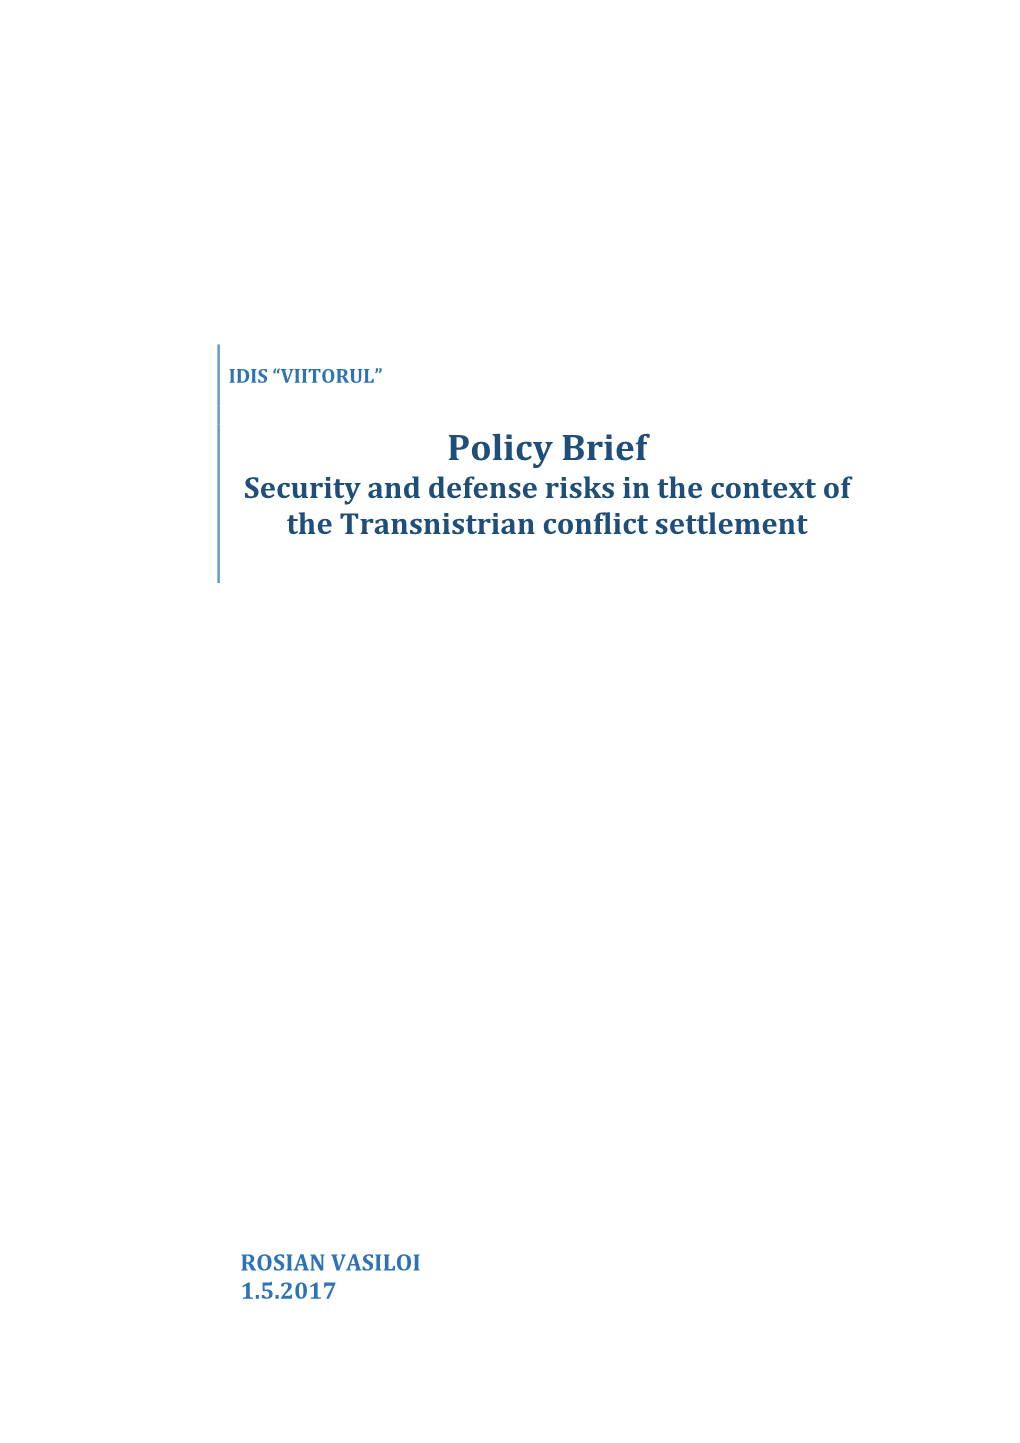 Policy Brief Security and Defense Risks in the Context of the Transnistrian Conflict Settlement